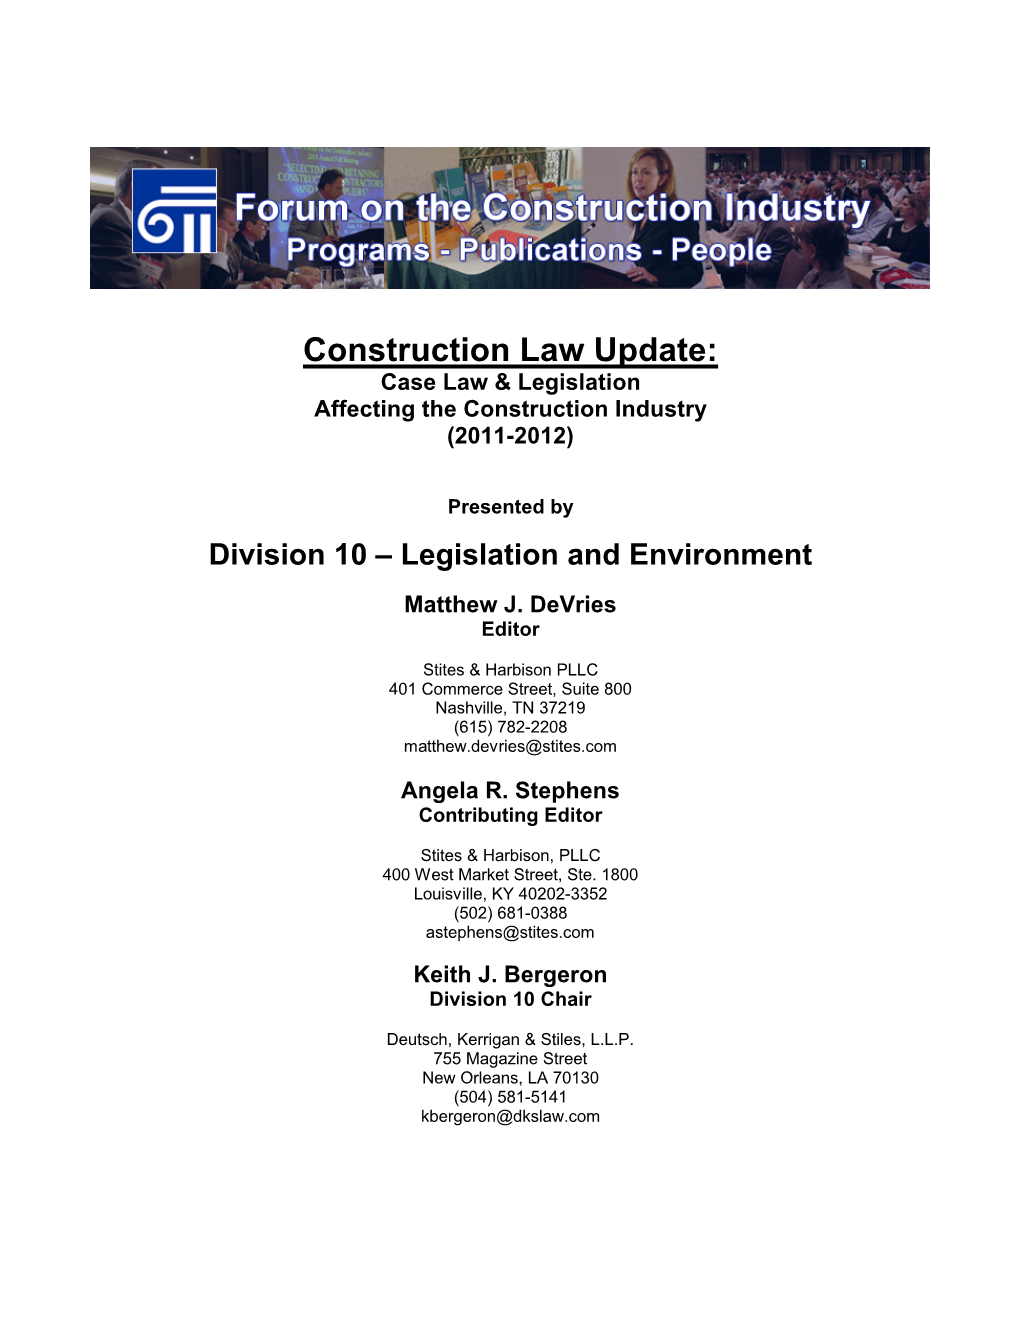 ABA Construction Law Update 2012